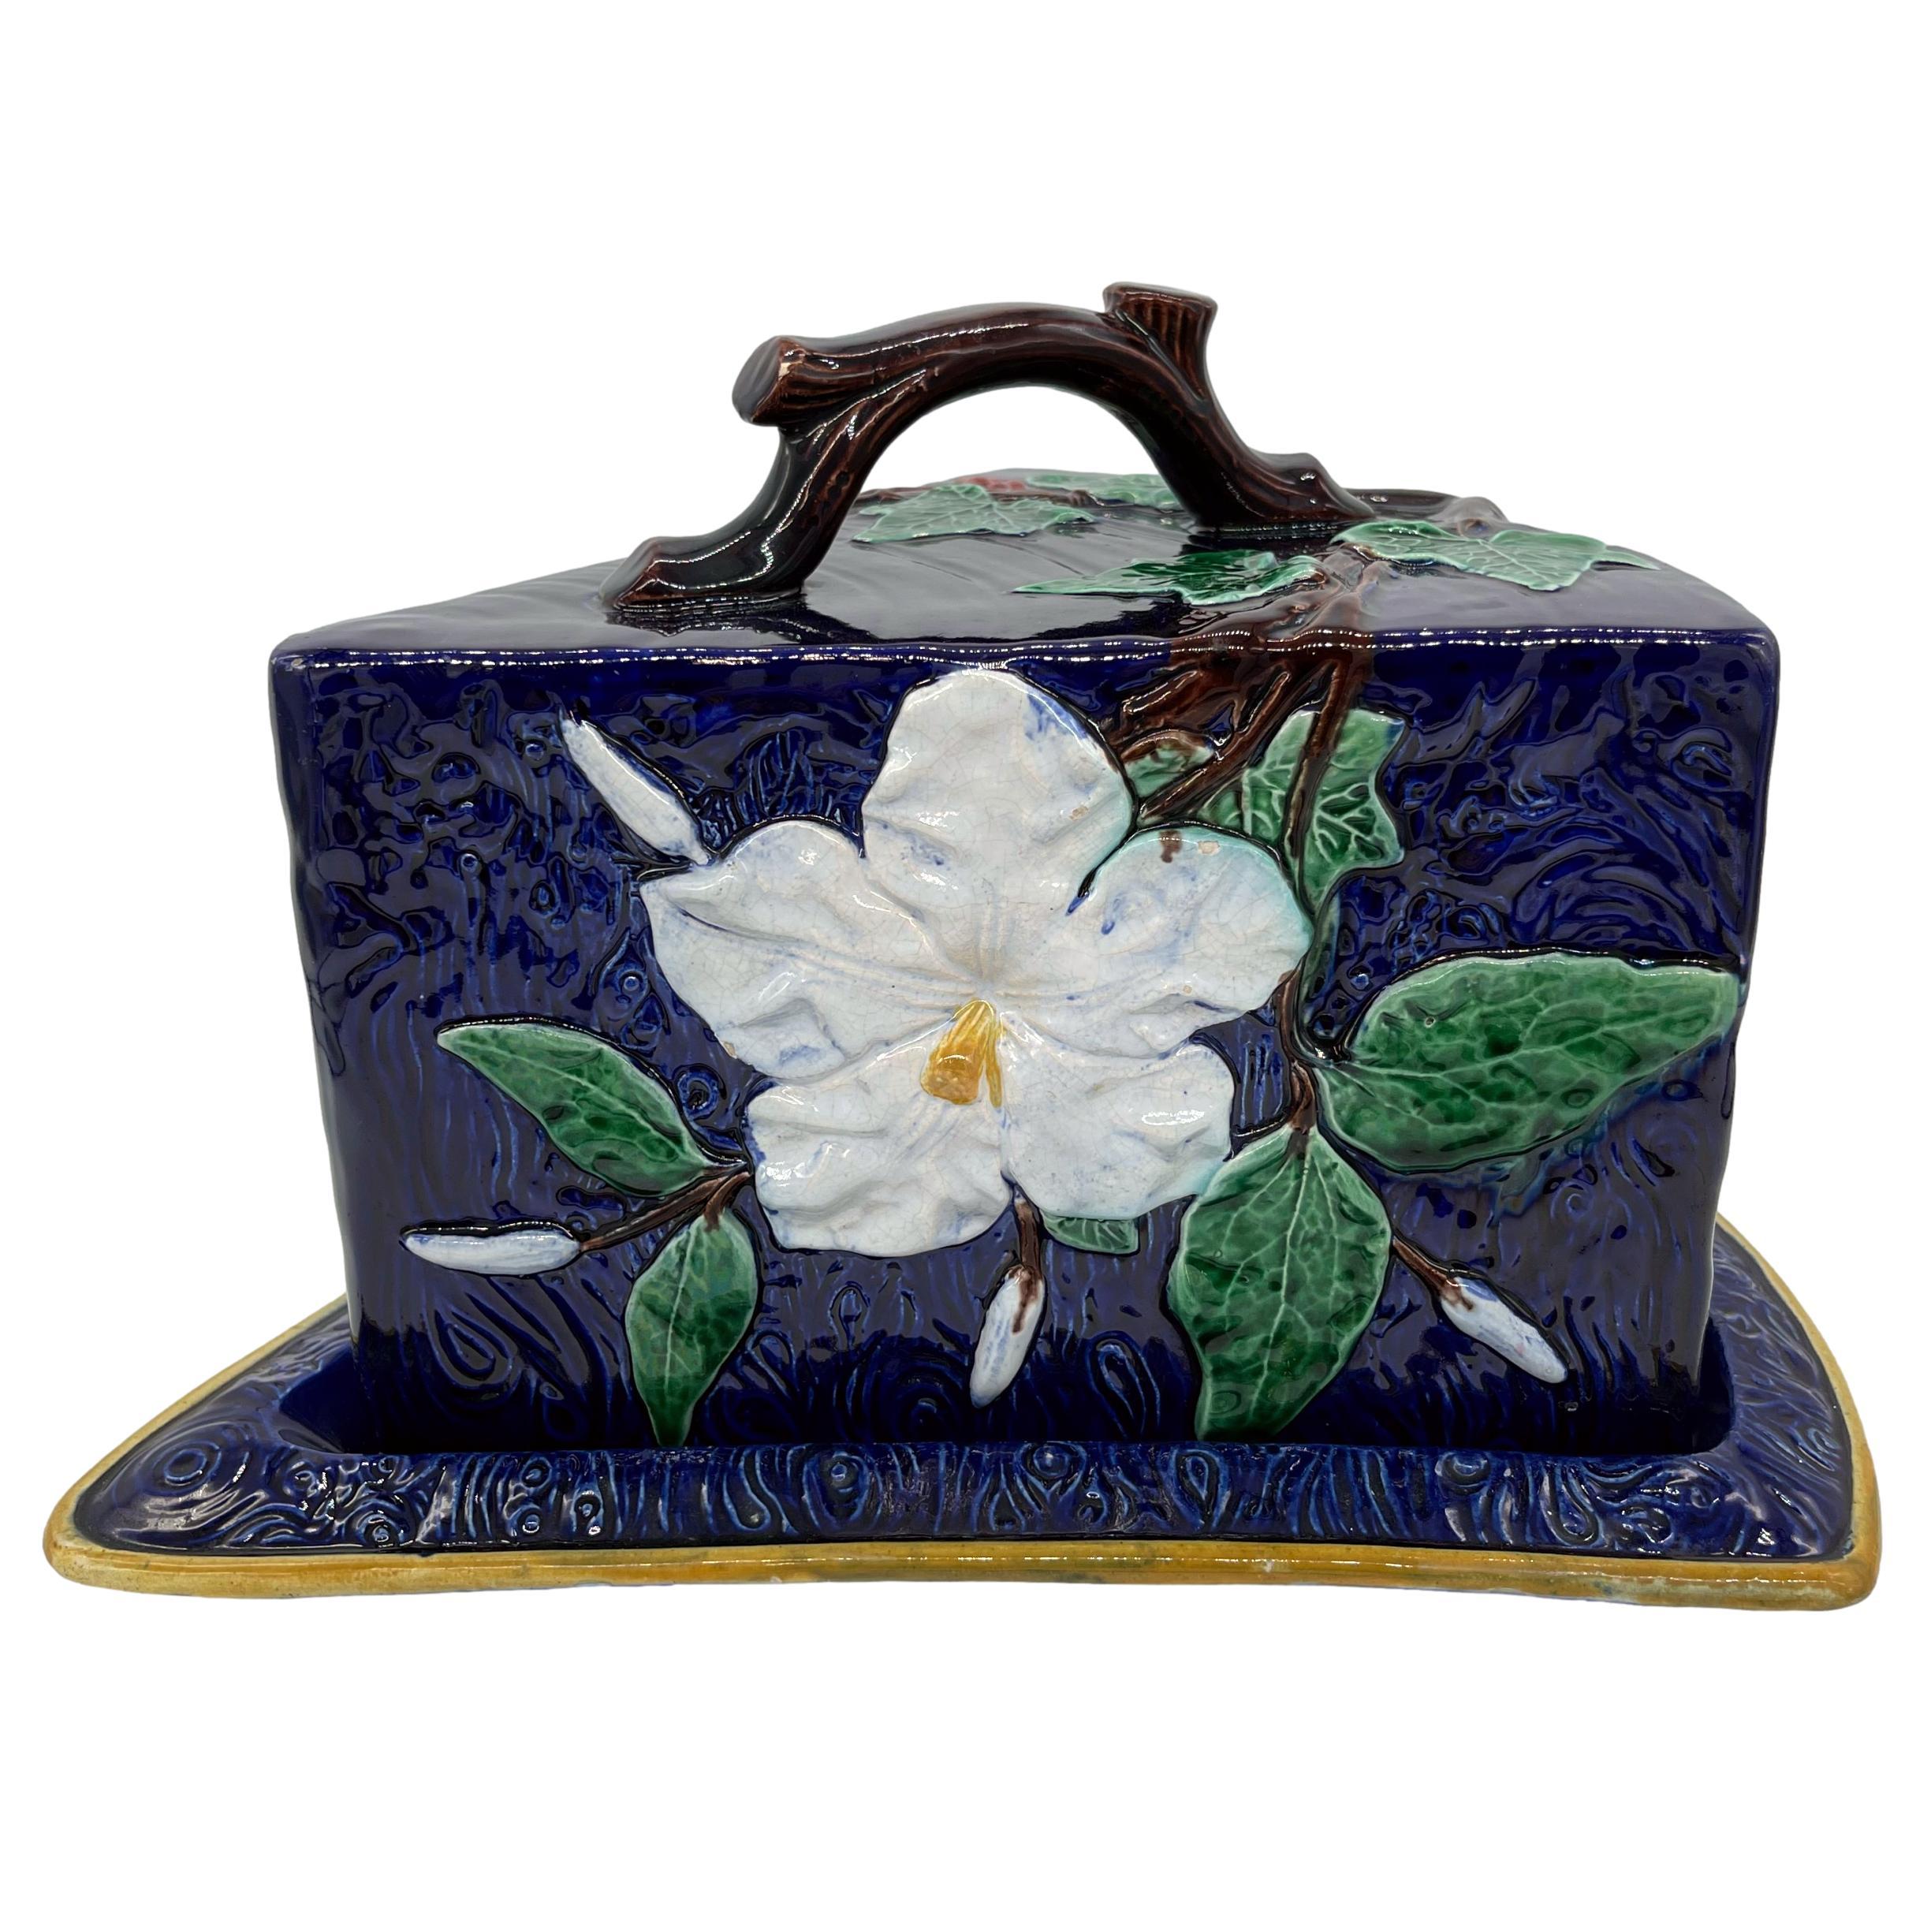 Large Majolica cheese keeper and stand, molded in the shape of a cheese wedge wrapped in vines, green glazed ivy leaves with red berries, and relief-molded trompe l'oeil large white flowers, on a faux bois cobalt blue-glazed ground, surmounted with